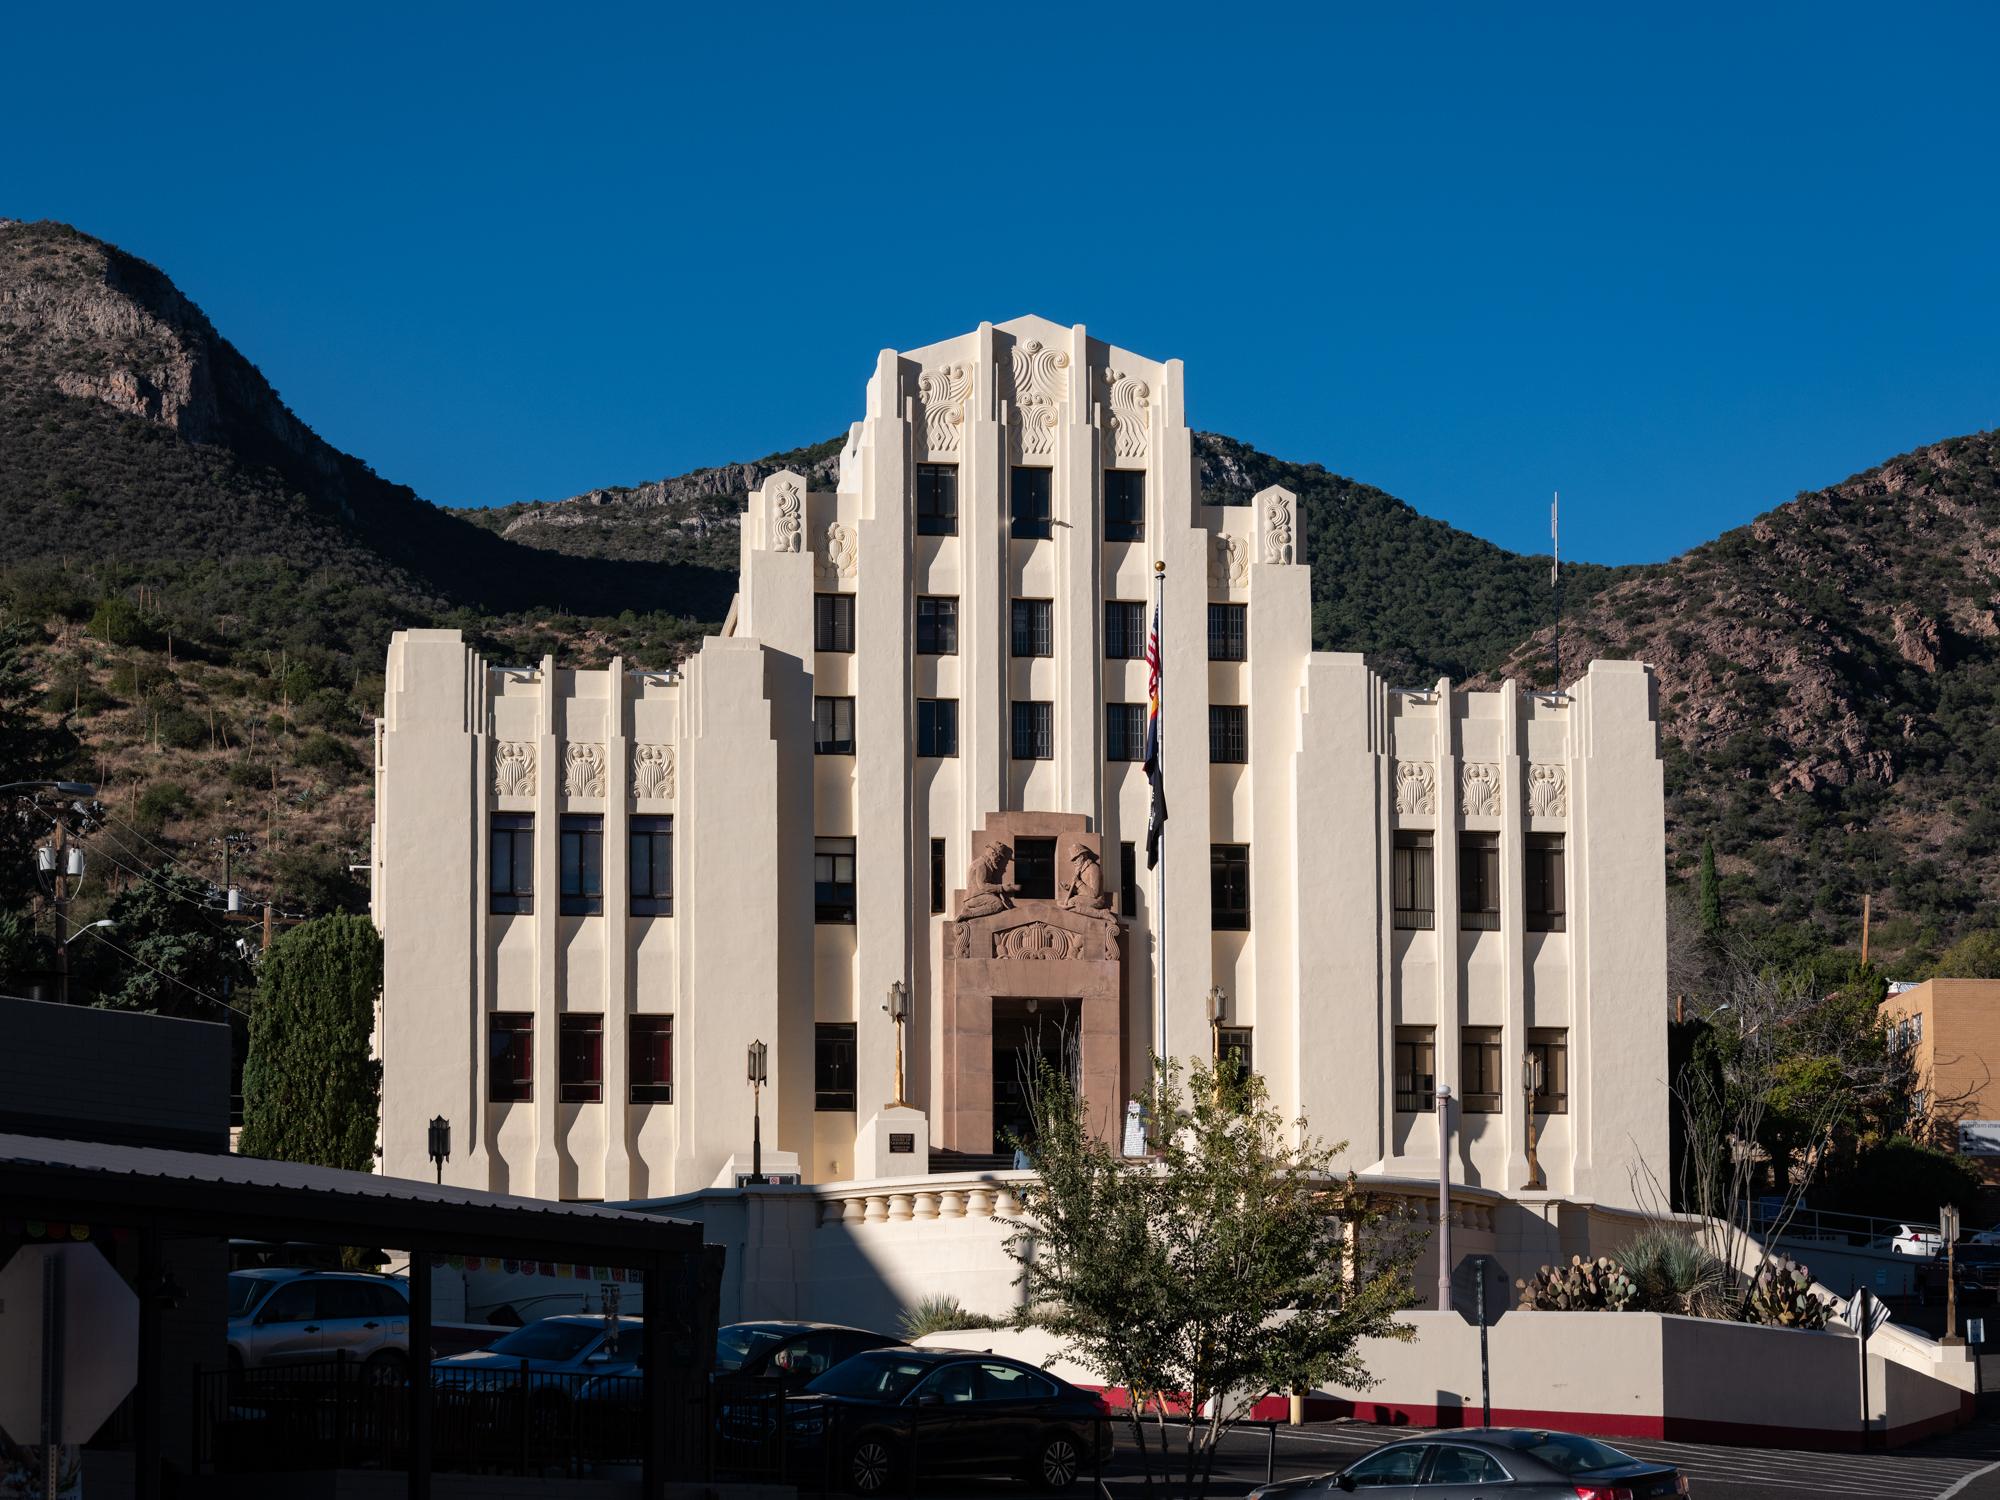 Social Media Migrant Smuggling - Bloomberg Businessweek - Superior Court in Cochise County. Bisbee, AZ.